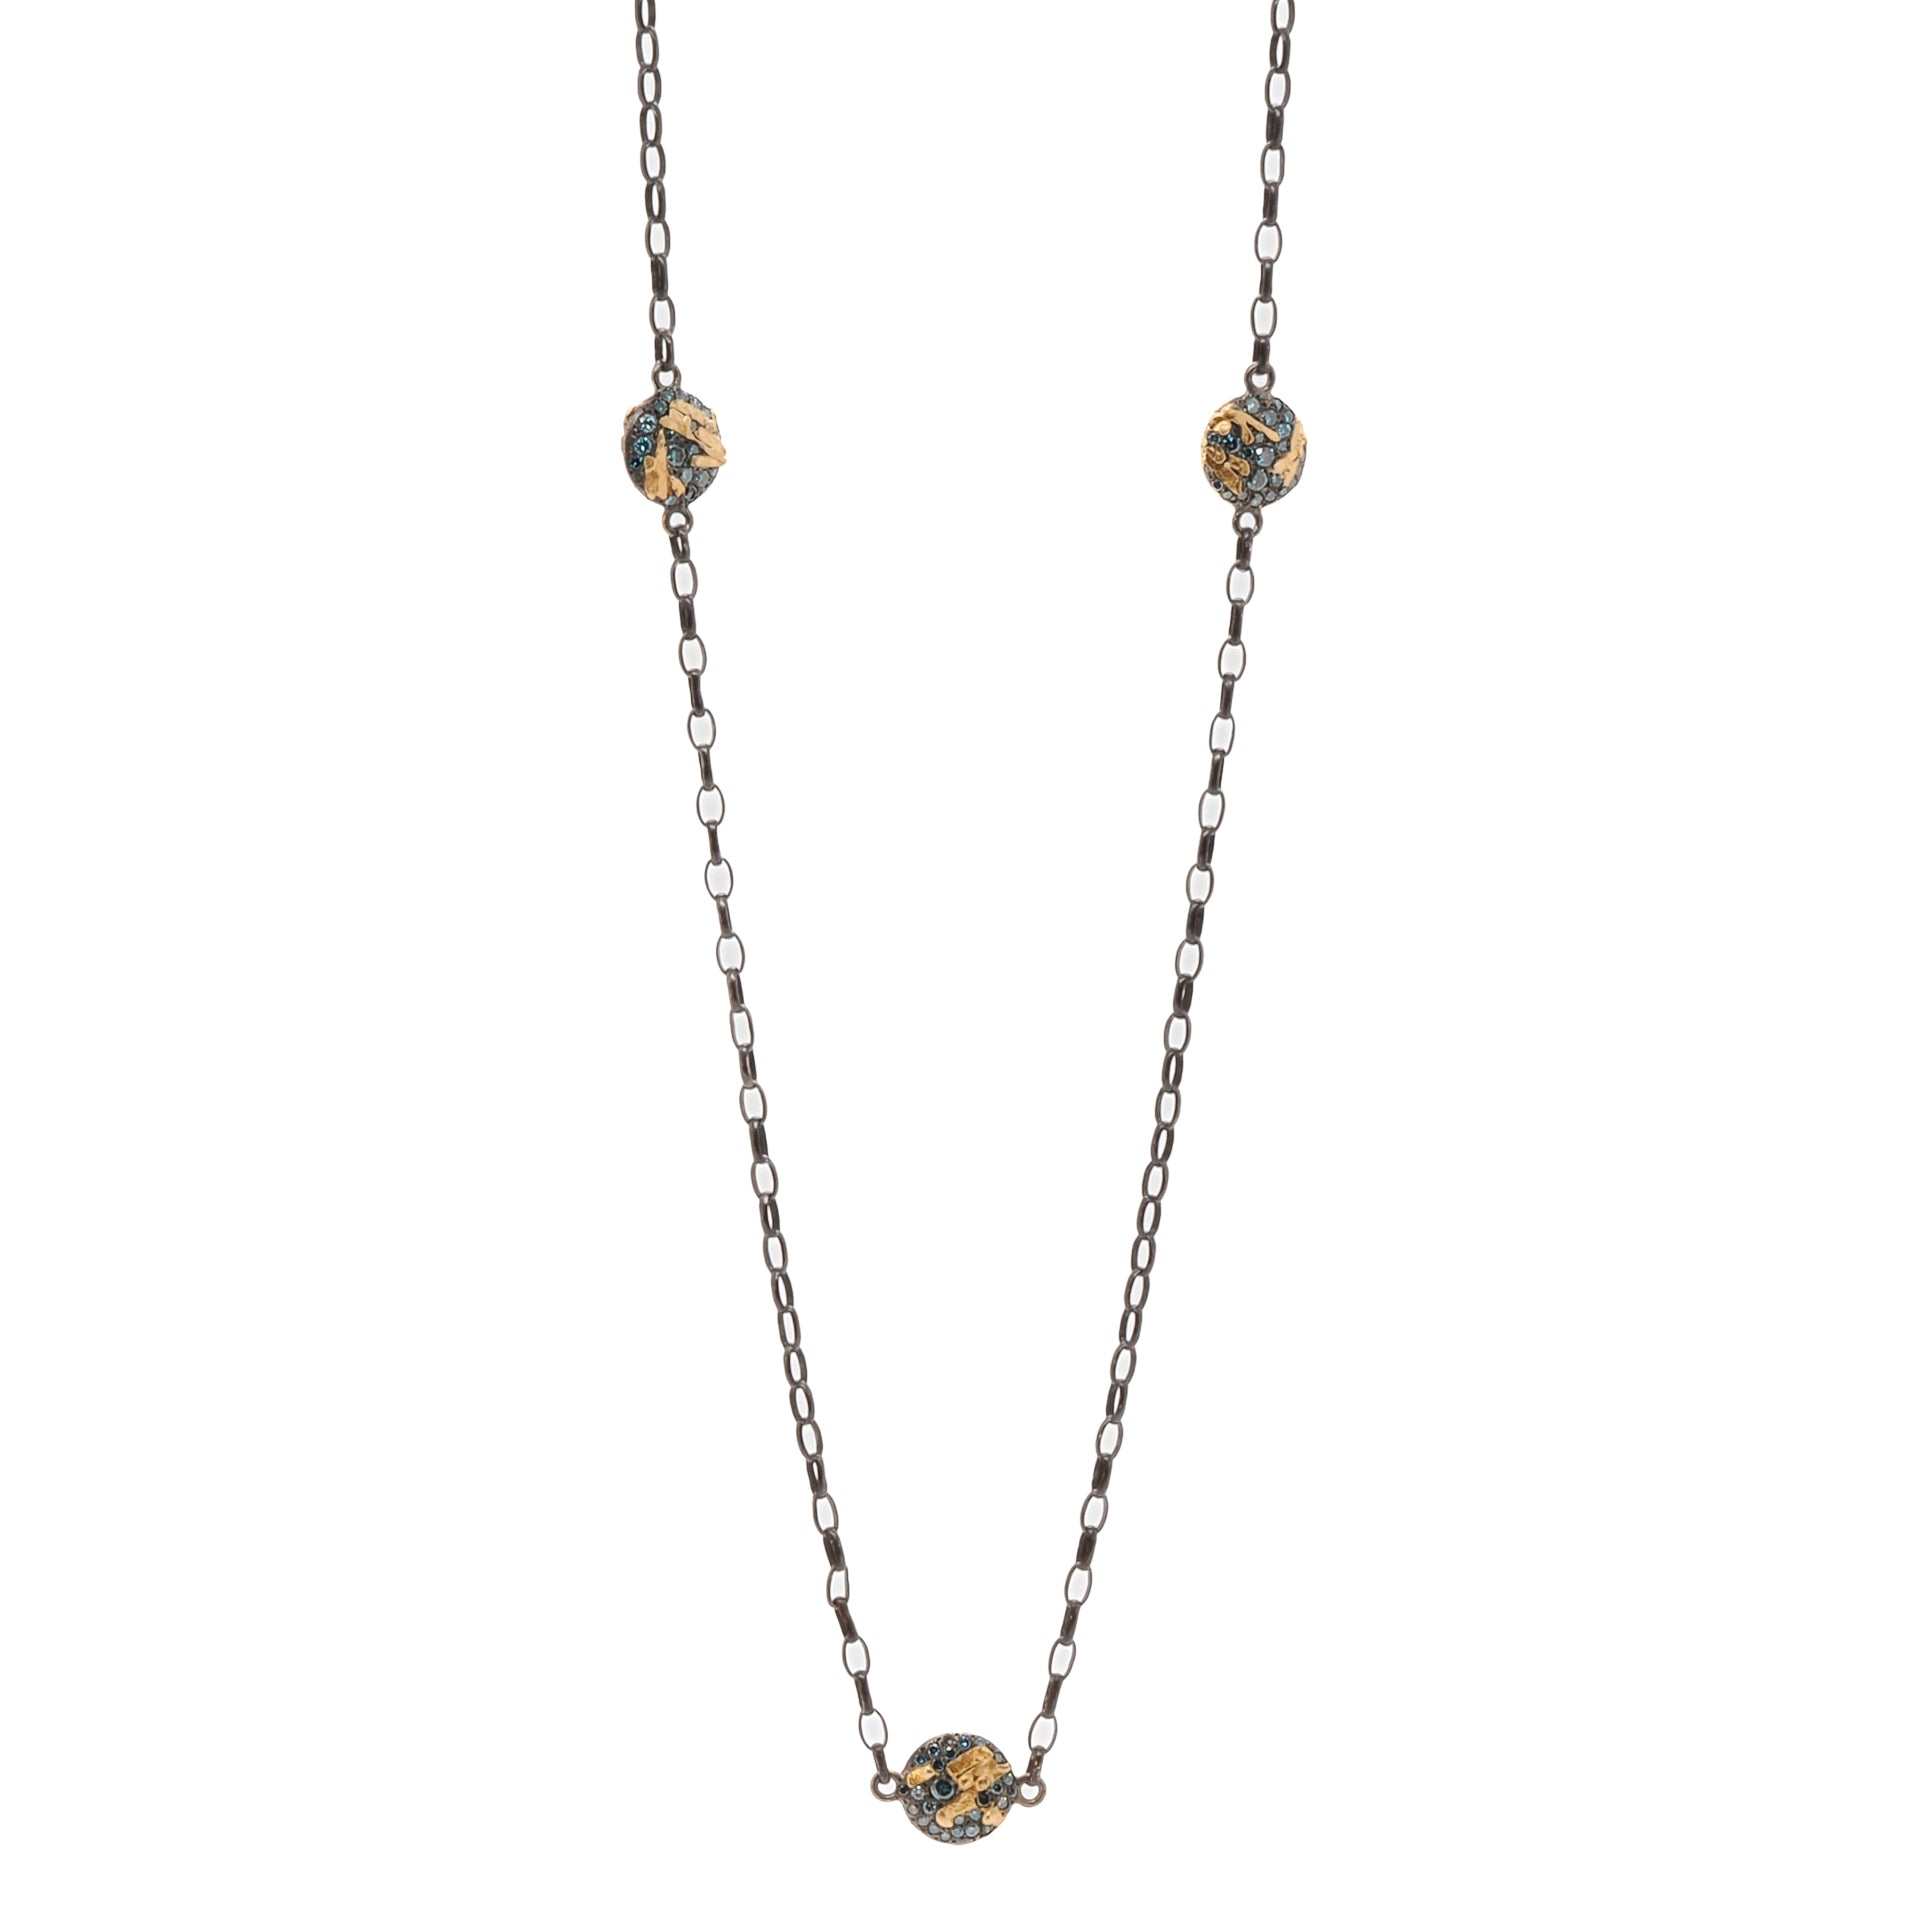 Nature Round Link Necklace featuring a stunning handmade design crafted with 21k gold over silver surface and adorned with 1.90 carats of petroleum diamonds.